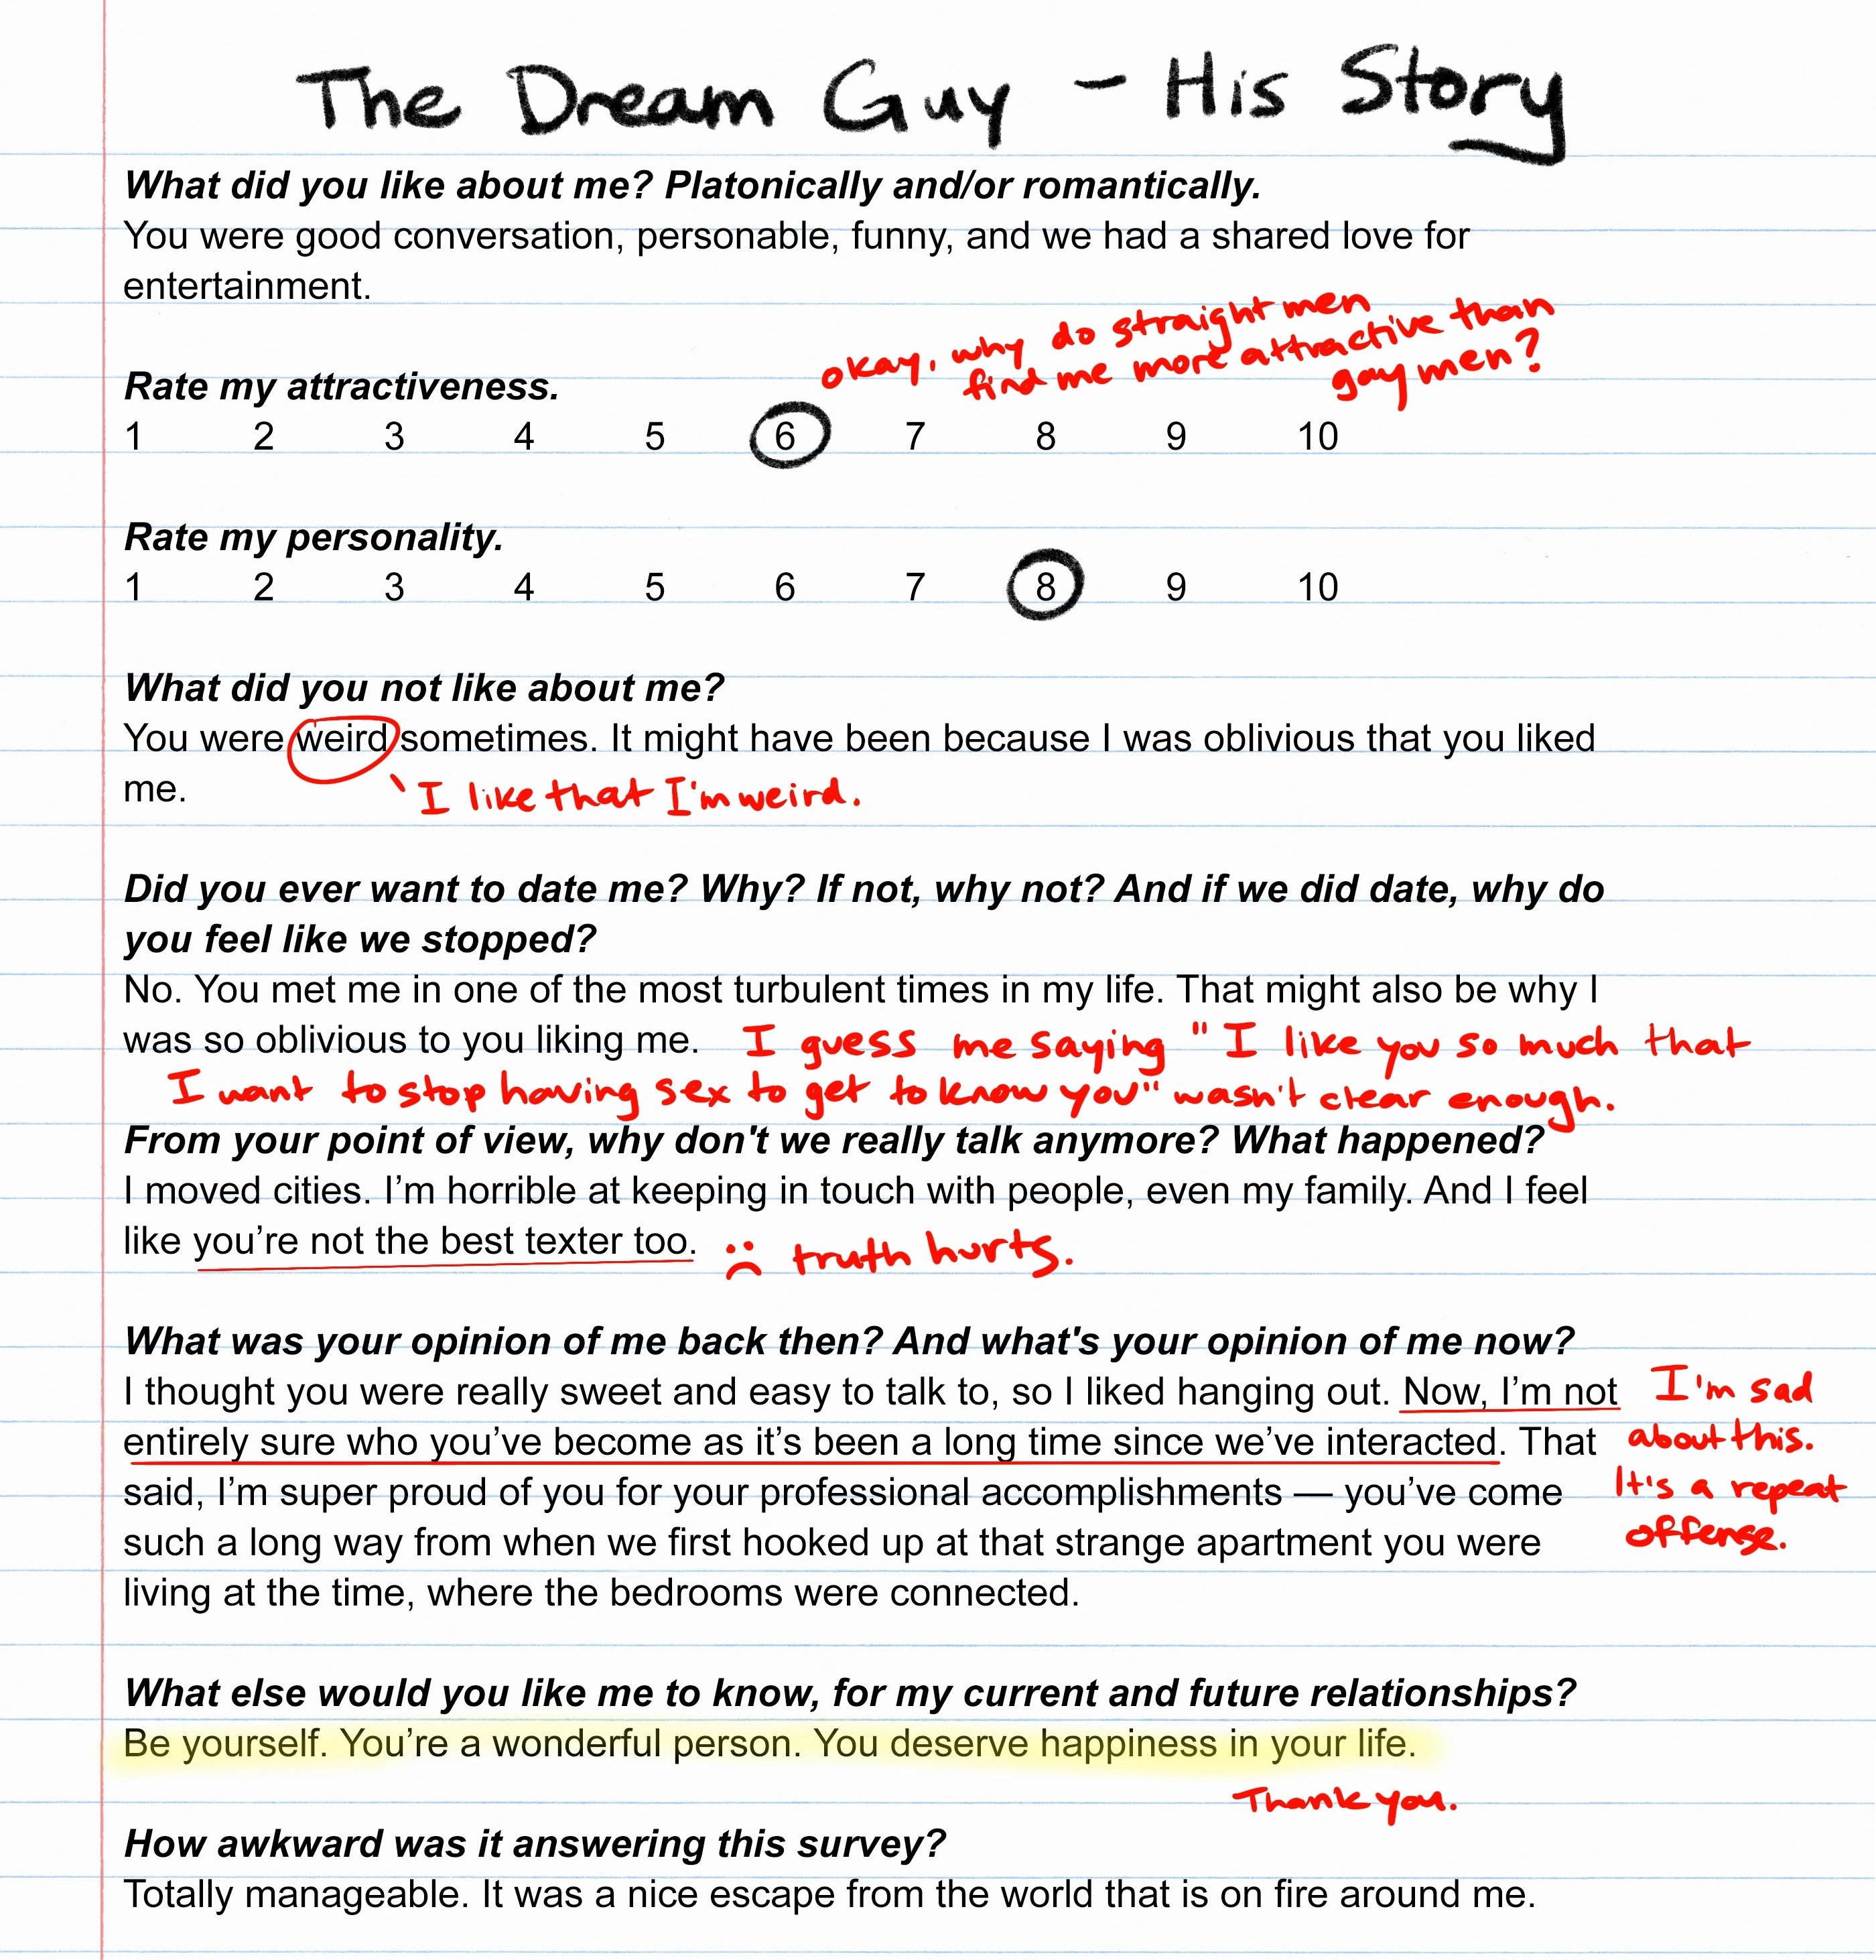 Survey results from The Dream Guy with comments from the author in red